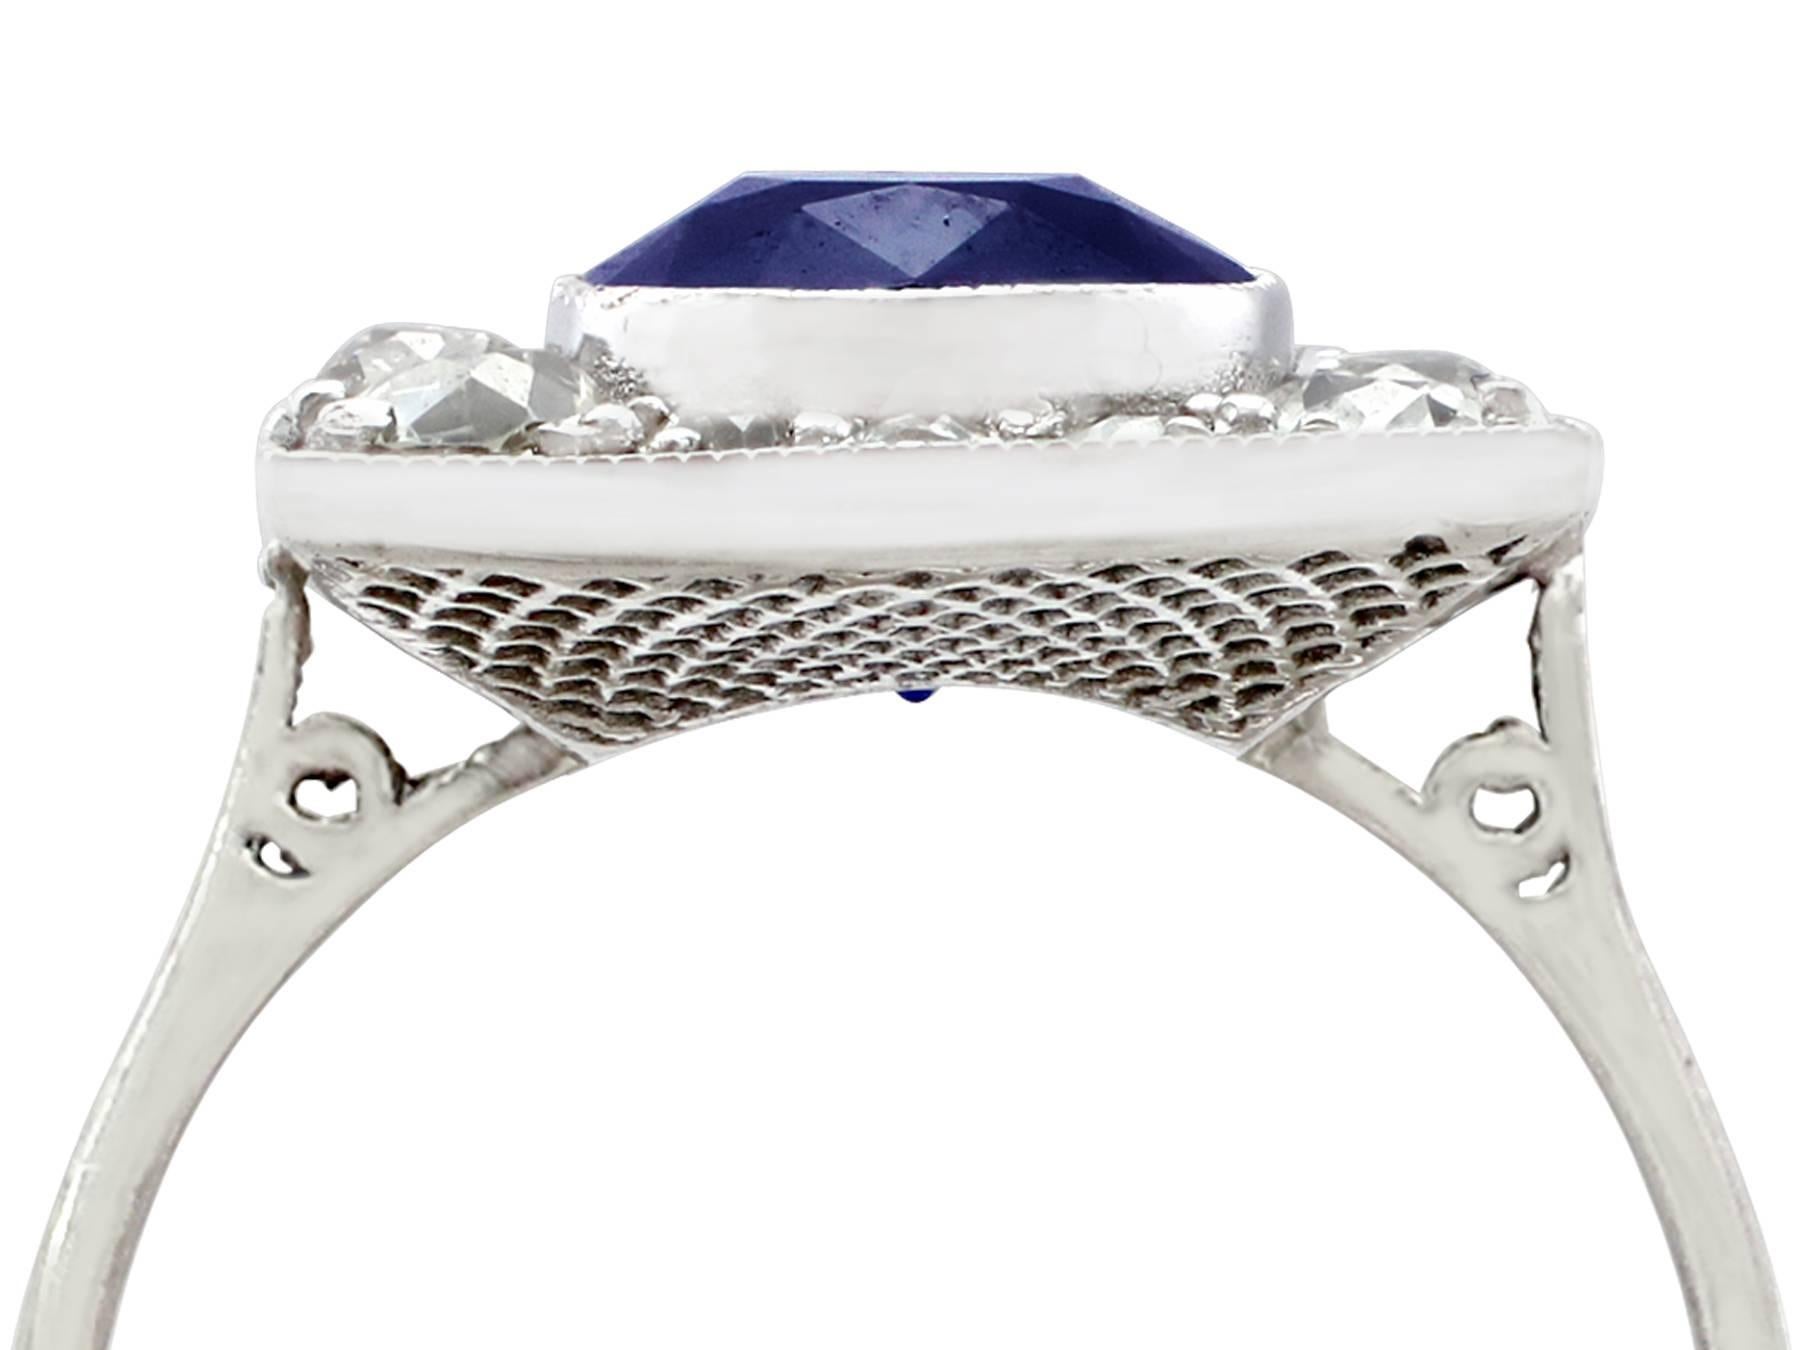 A stunning, fine and impressive antique 2.93 carat blue sapphire and 0.68 carat diamond, 18 karat white gold dress ring; part of our diverse 1920's jewelry collections

This stunning, fine and impressive 1920's sapphire and diamond ring has been